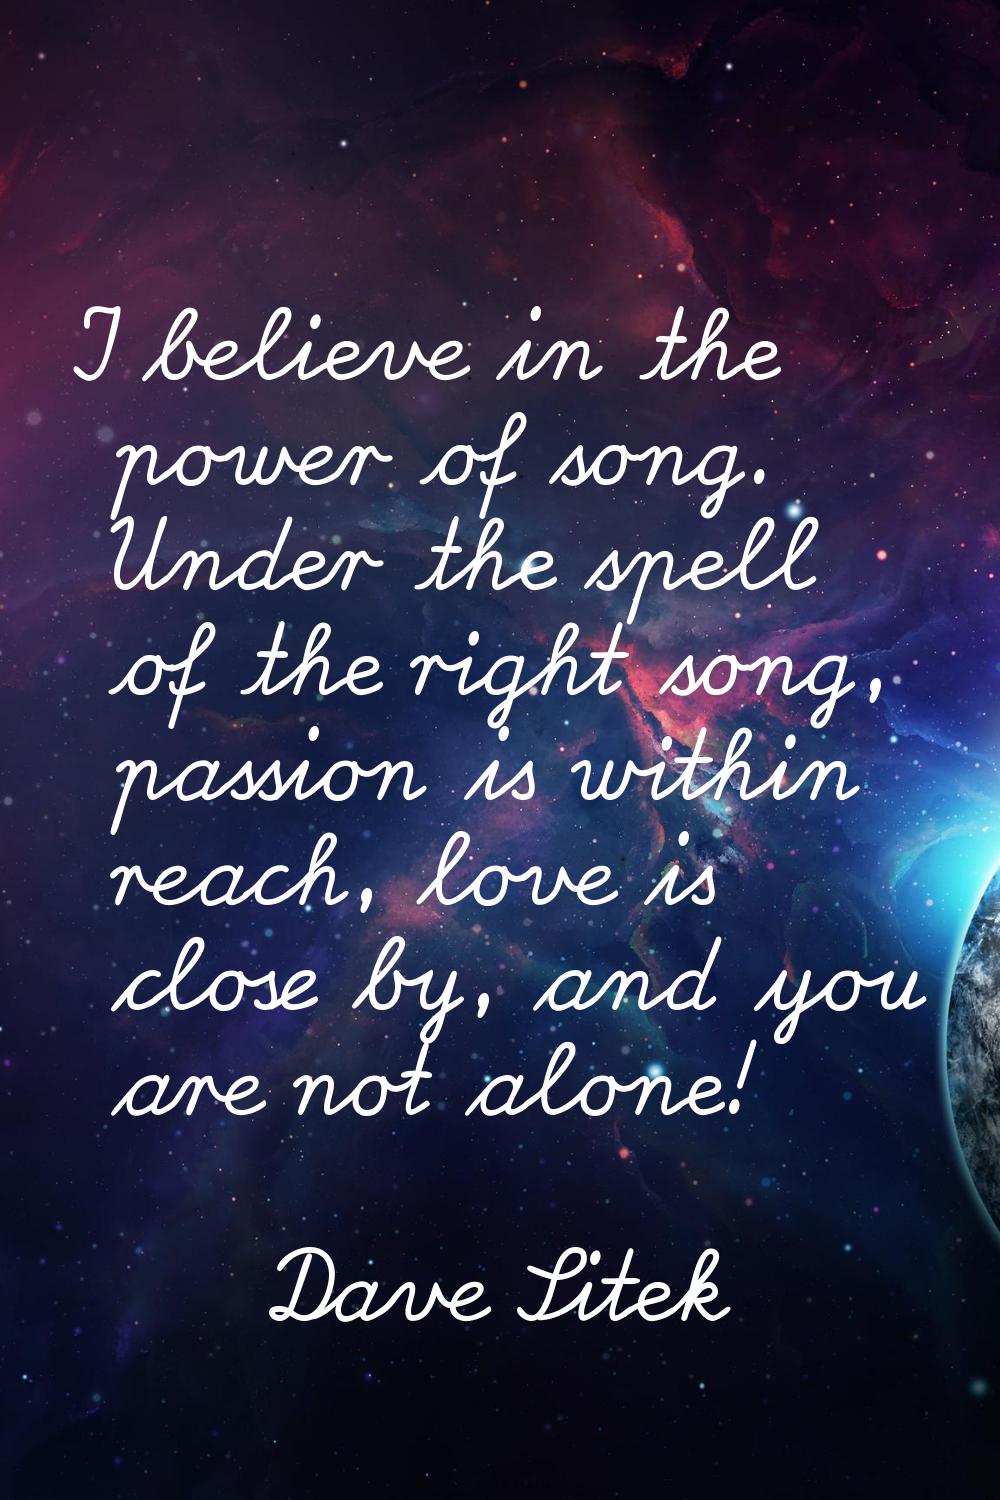 I believe in the power of song. Under the spell of the right song, passion is within reach, love is